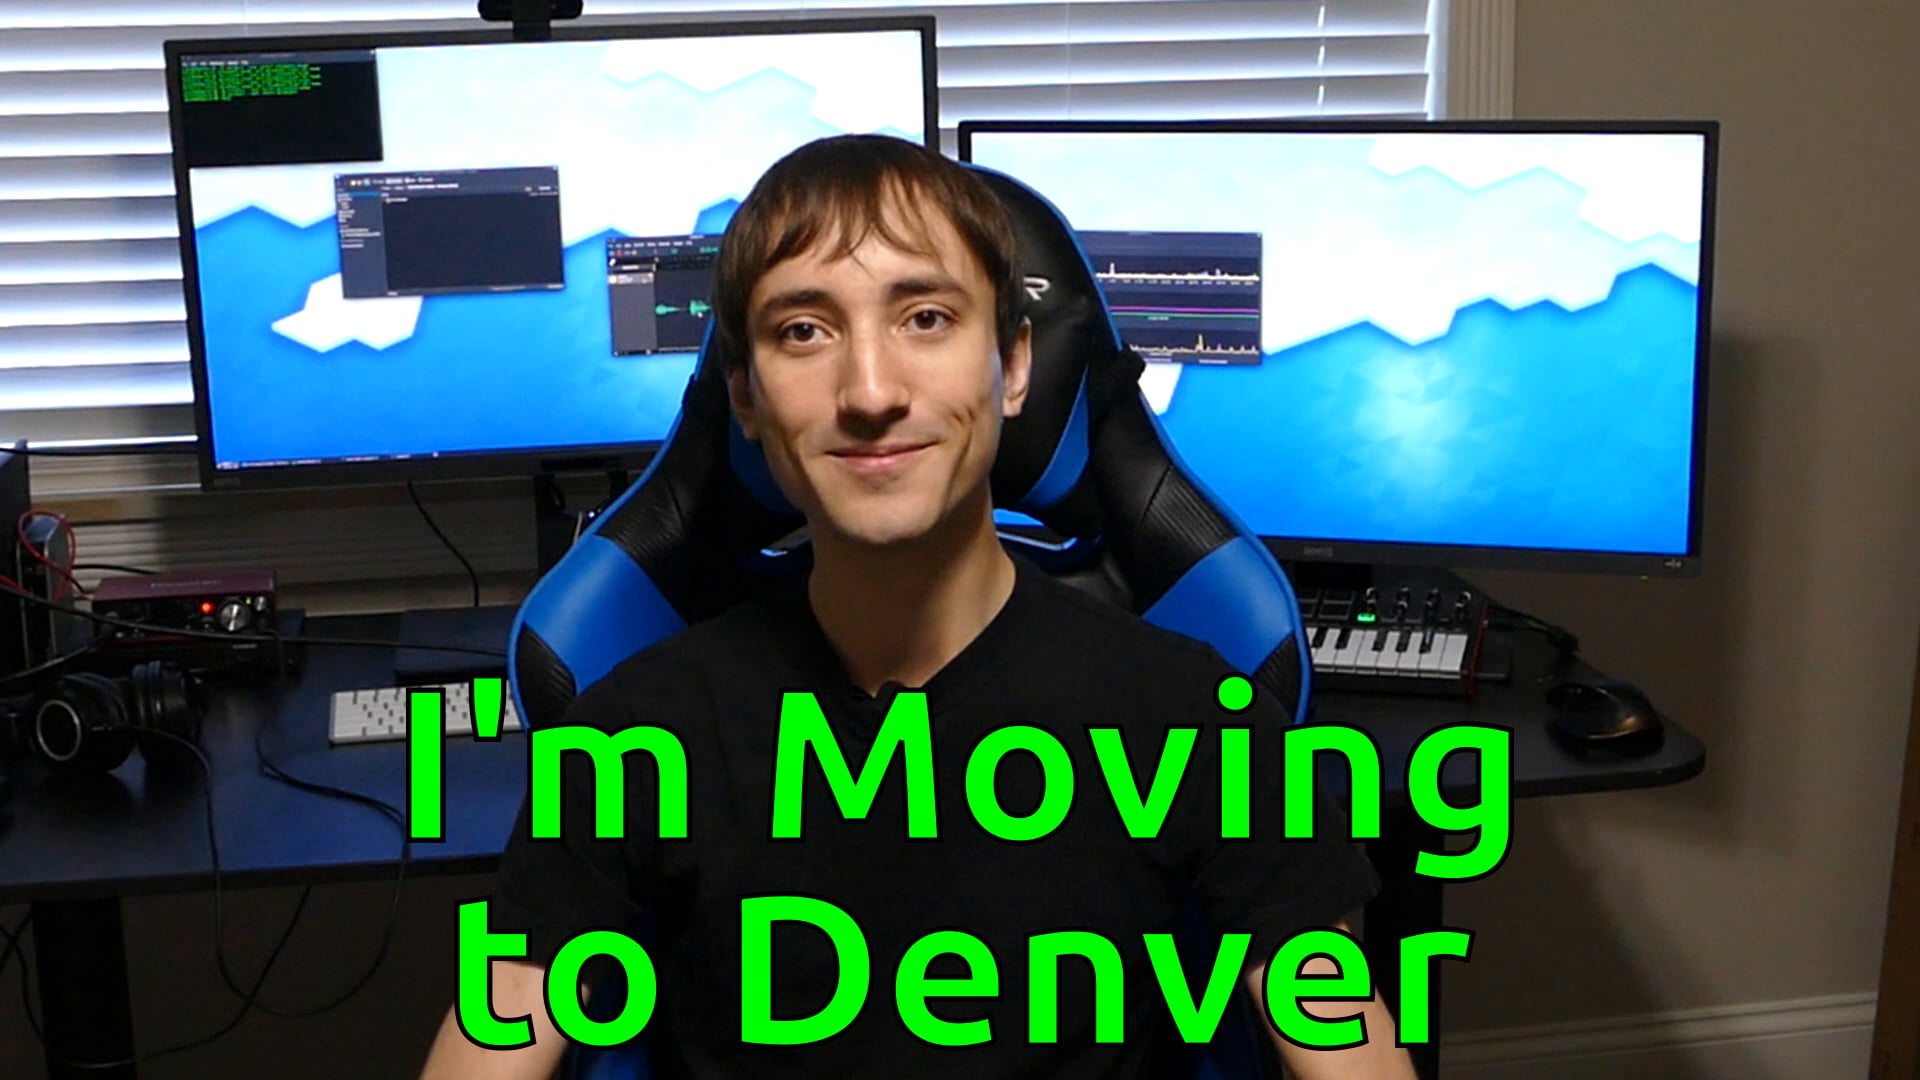 NOTS Network Update - I'm Moving to Denver